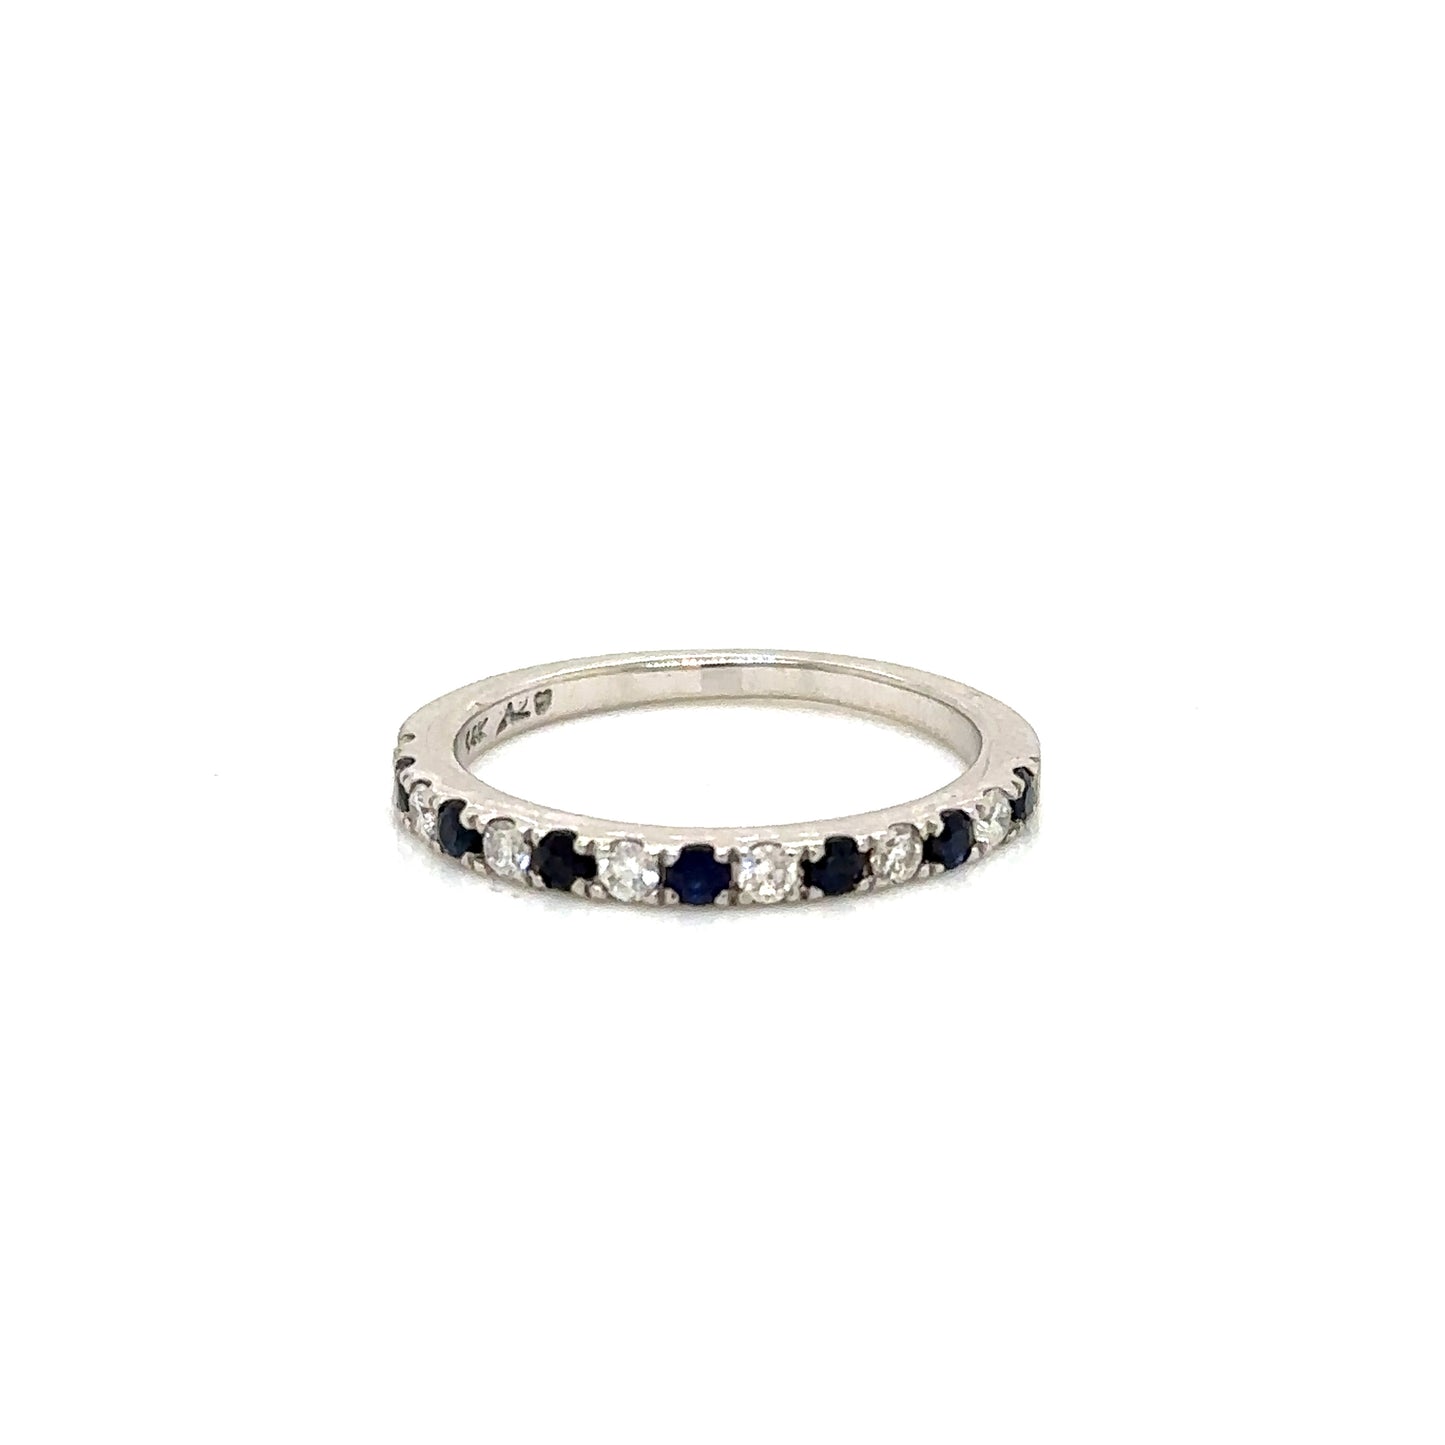 IMMEDIATE DELIVERY / Half Churumbela Amelia Alternated with Diamonds and Sapphires / 14k White Gold / Size 4.5